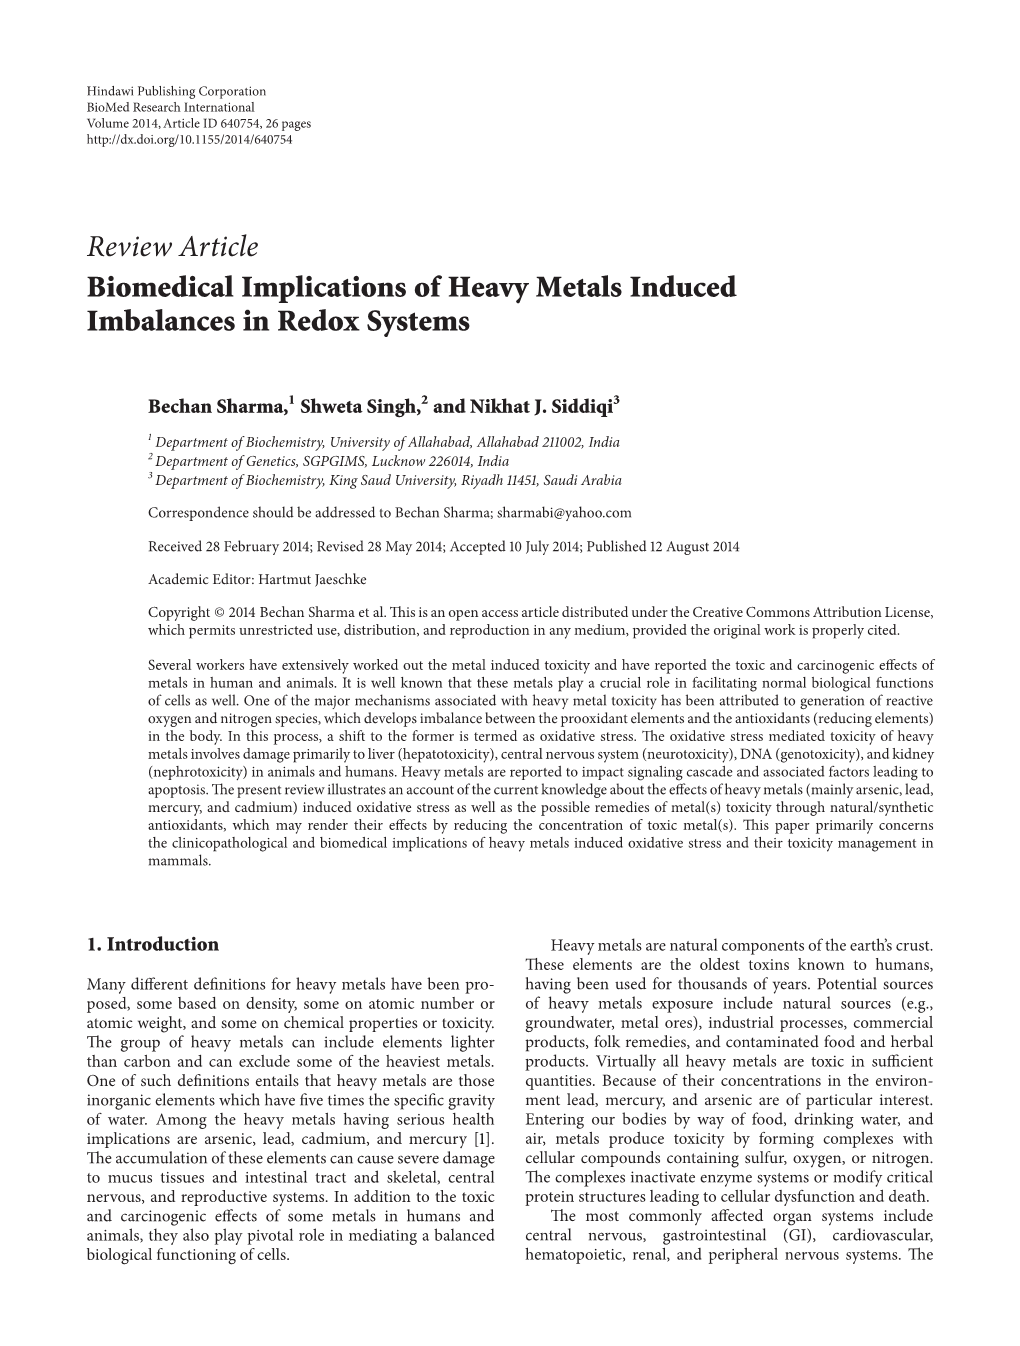 Biomedical Implications of Heavy Metals Induced Imbalances in Redox Systems